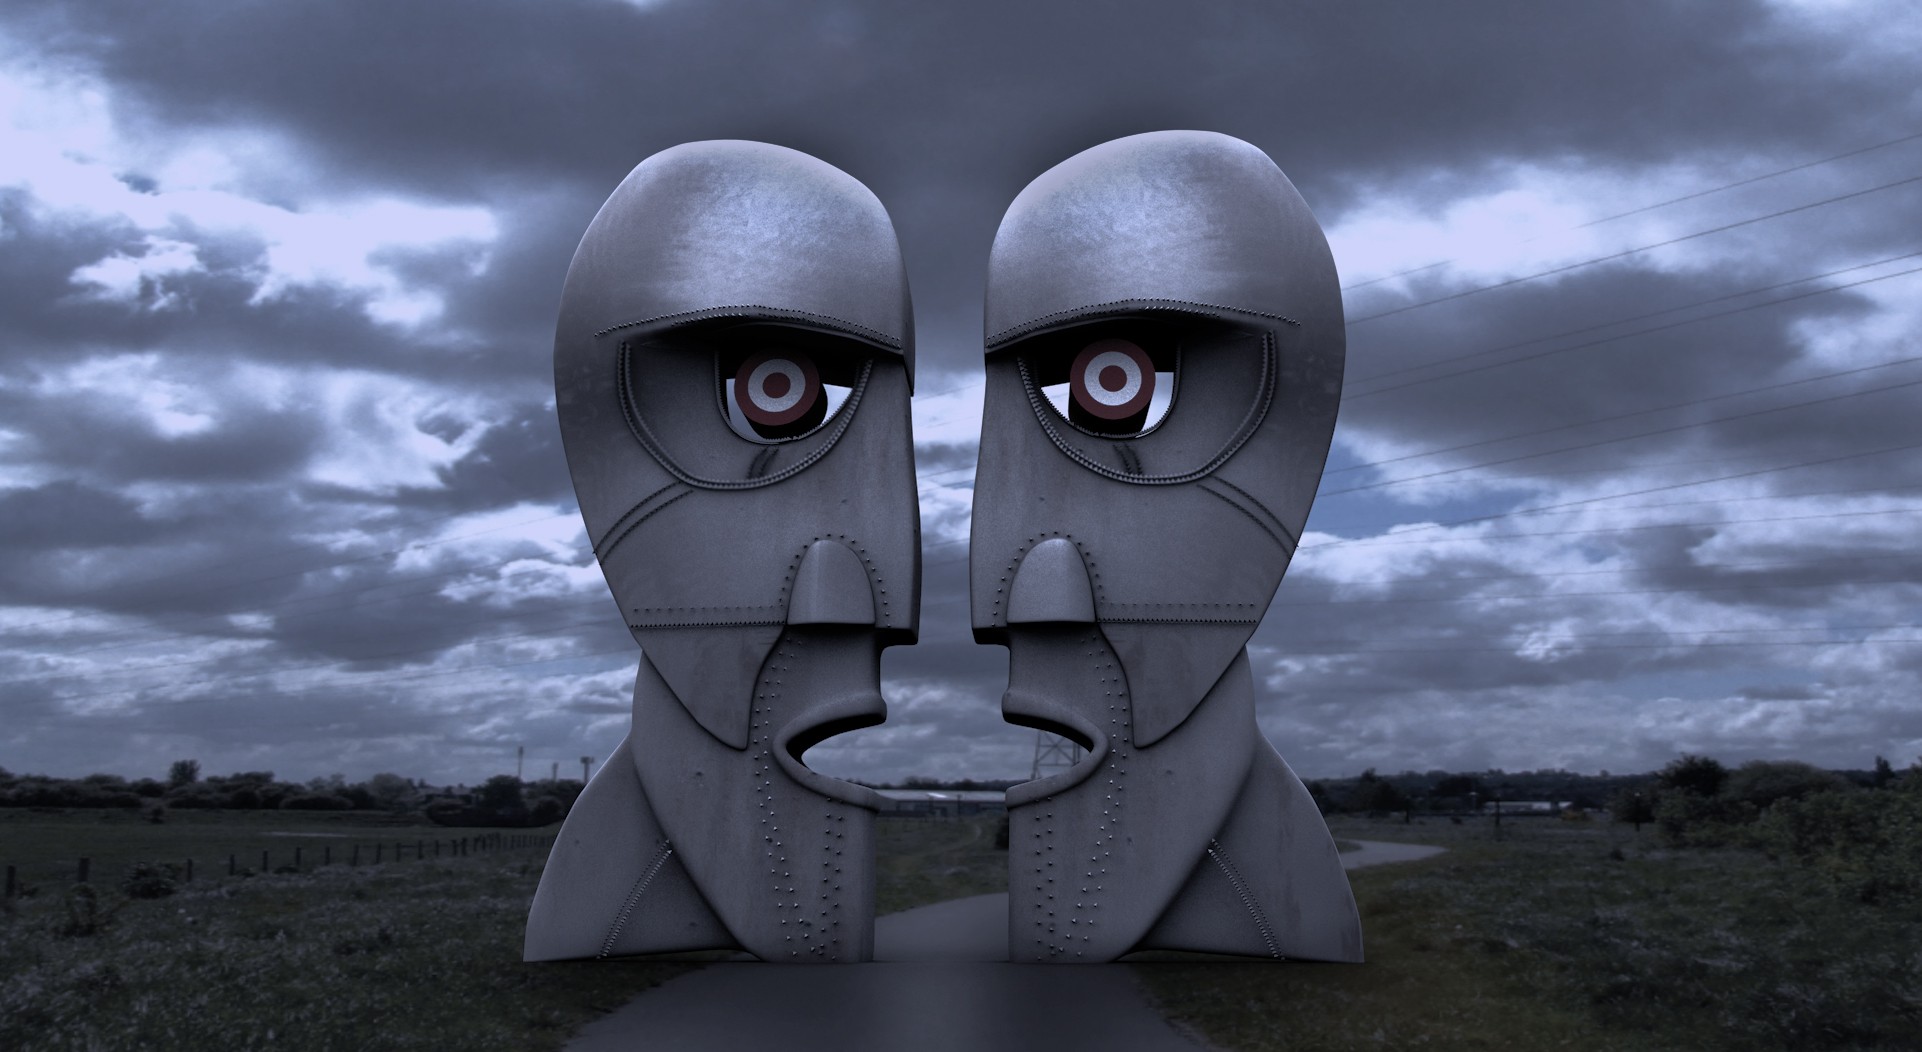 General 1922x1052 Pink Floyd sculpture metal symmetry nature road field trees clouds evening artwork band